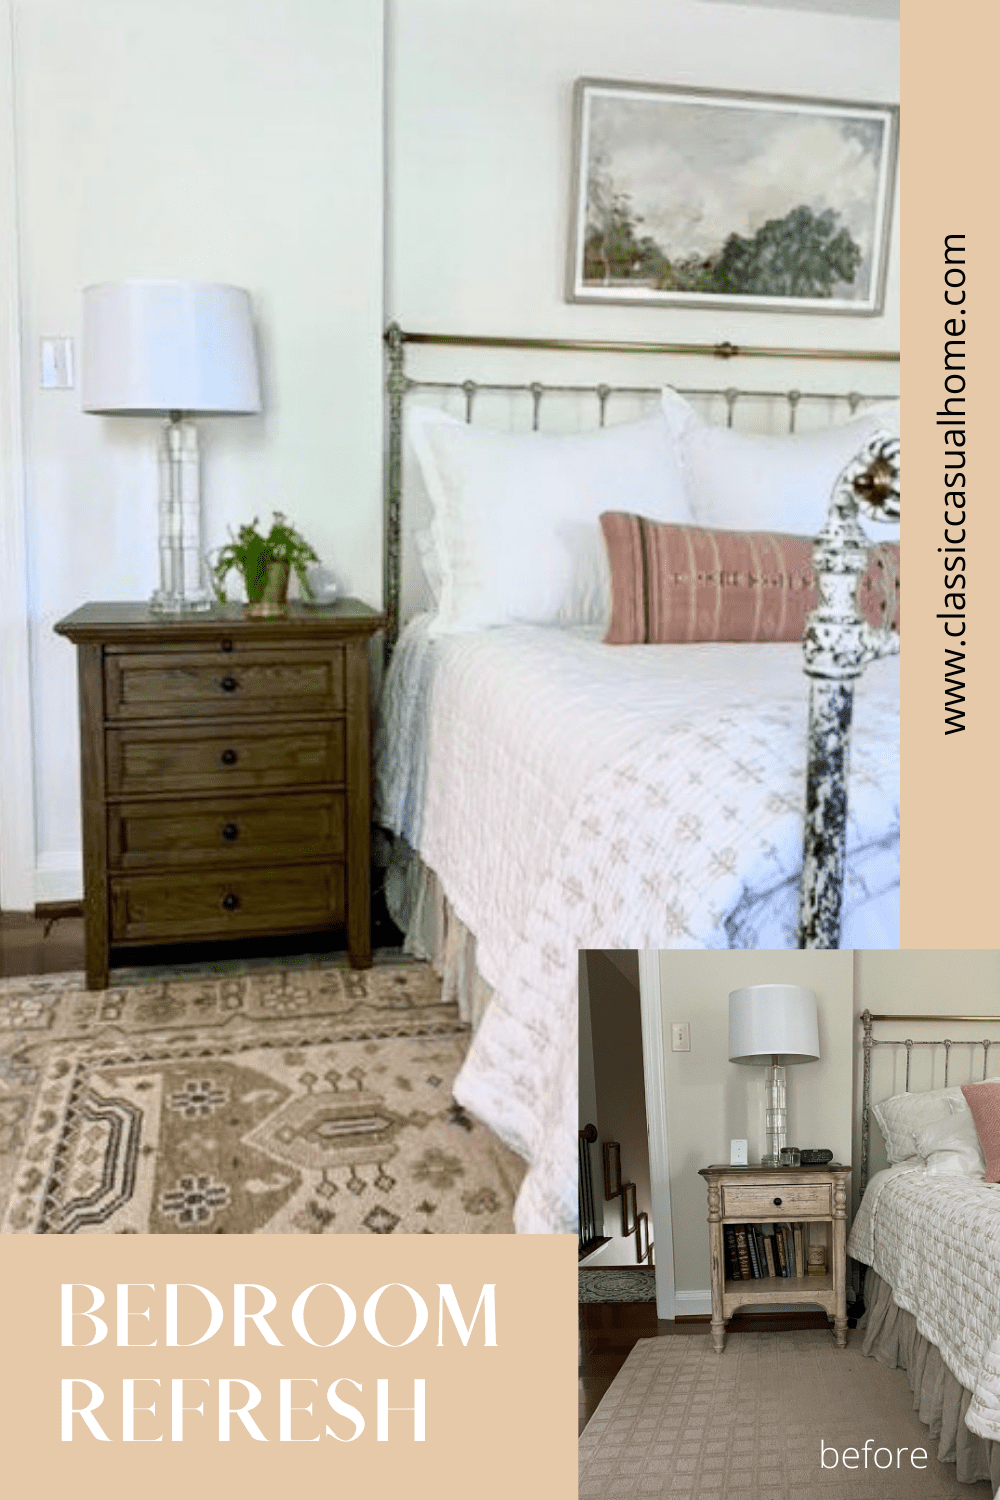 Bedroom refresh with new bedside chests